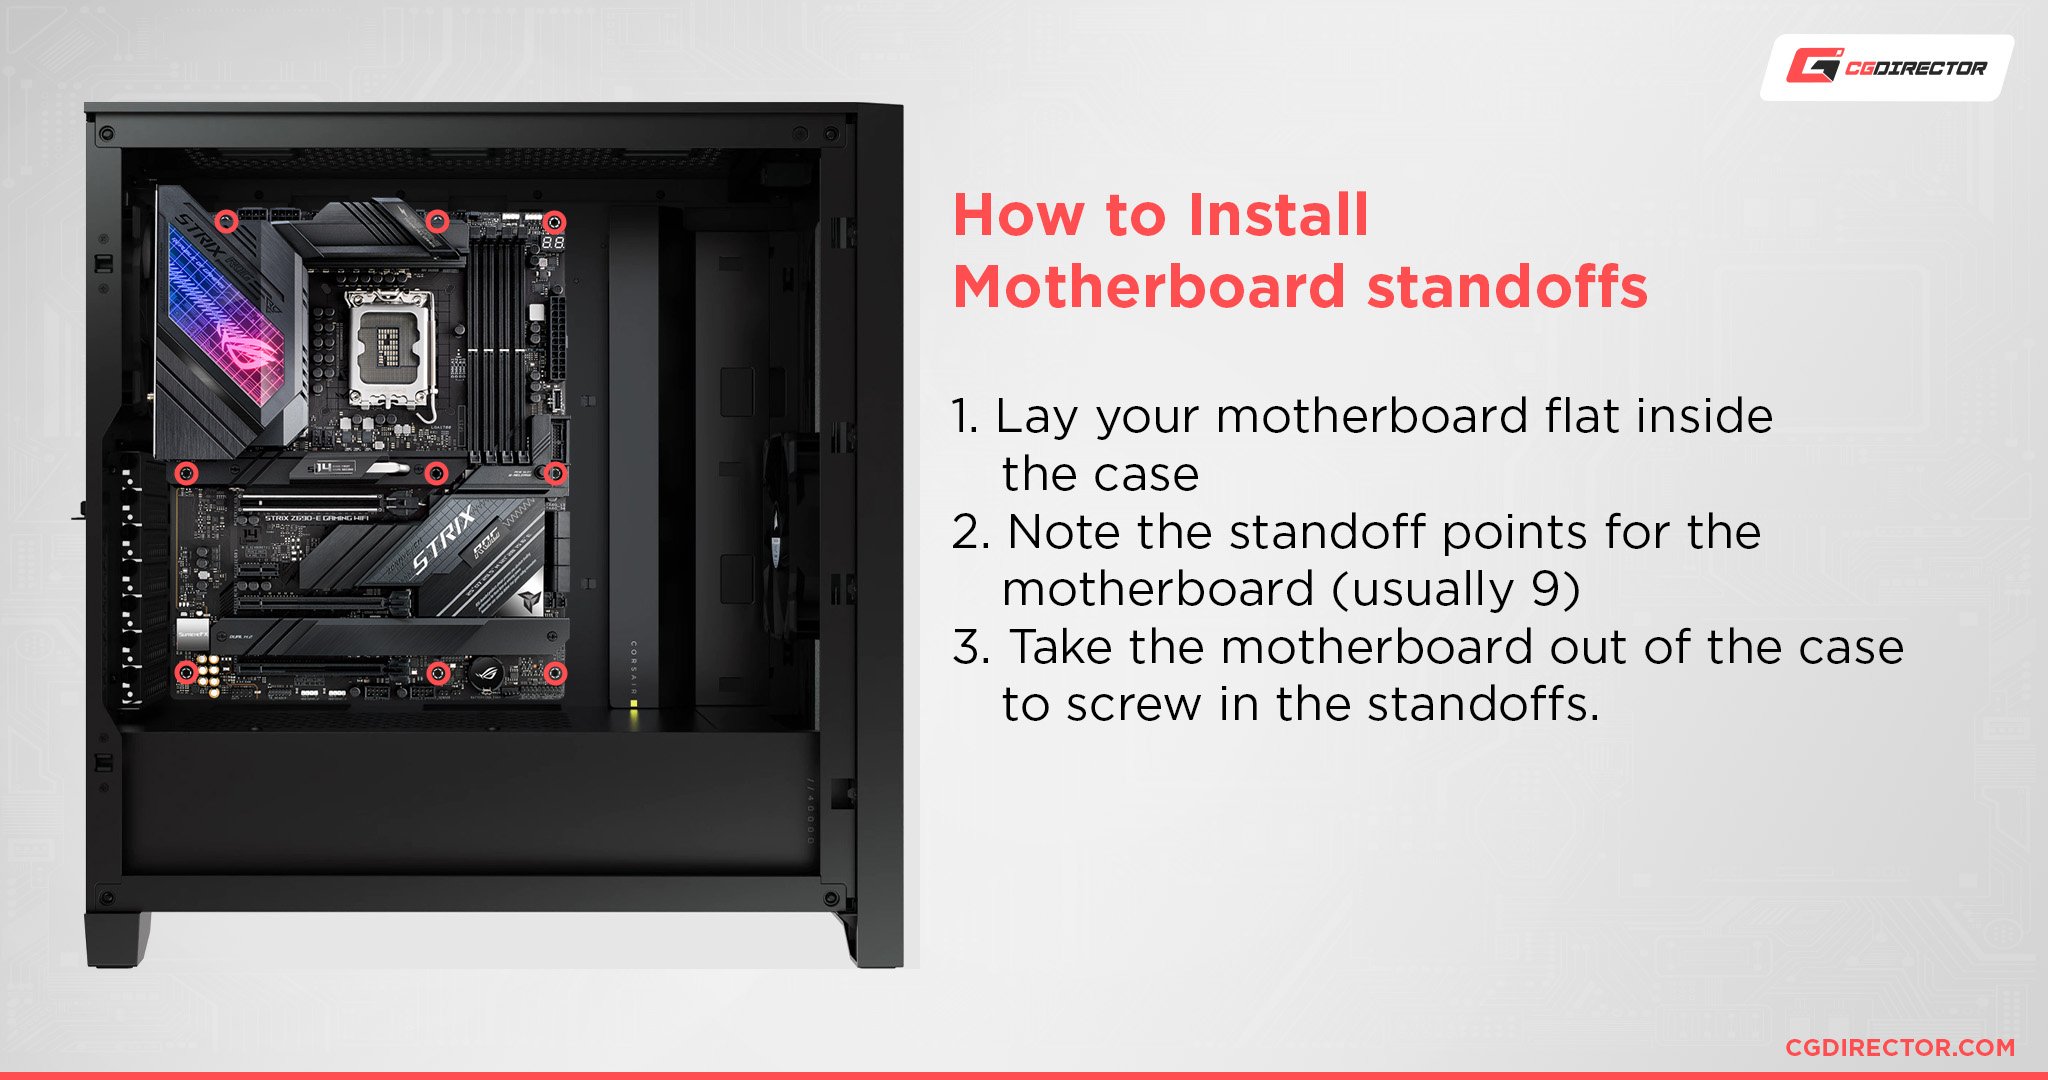 How to Install Motherboard Standoffs